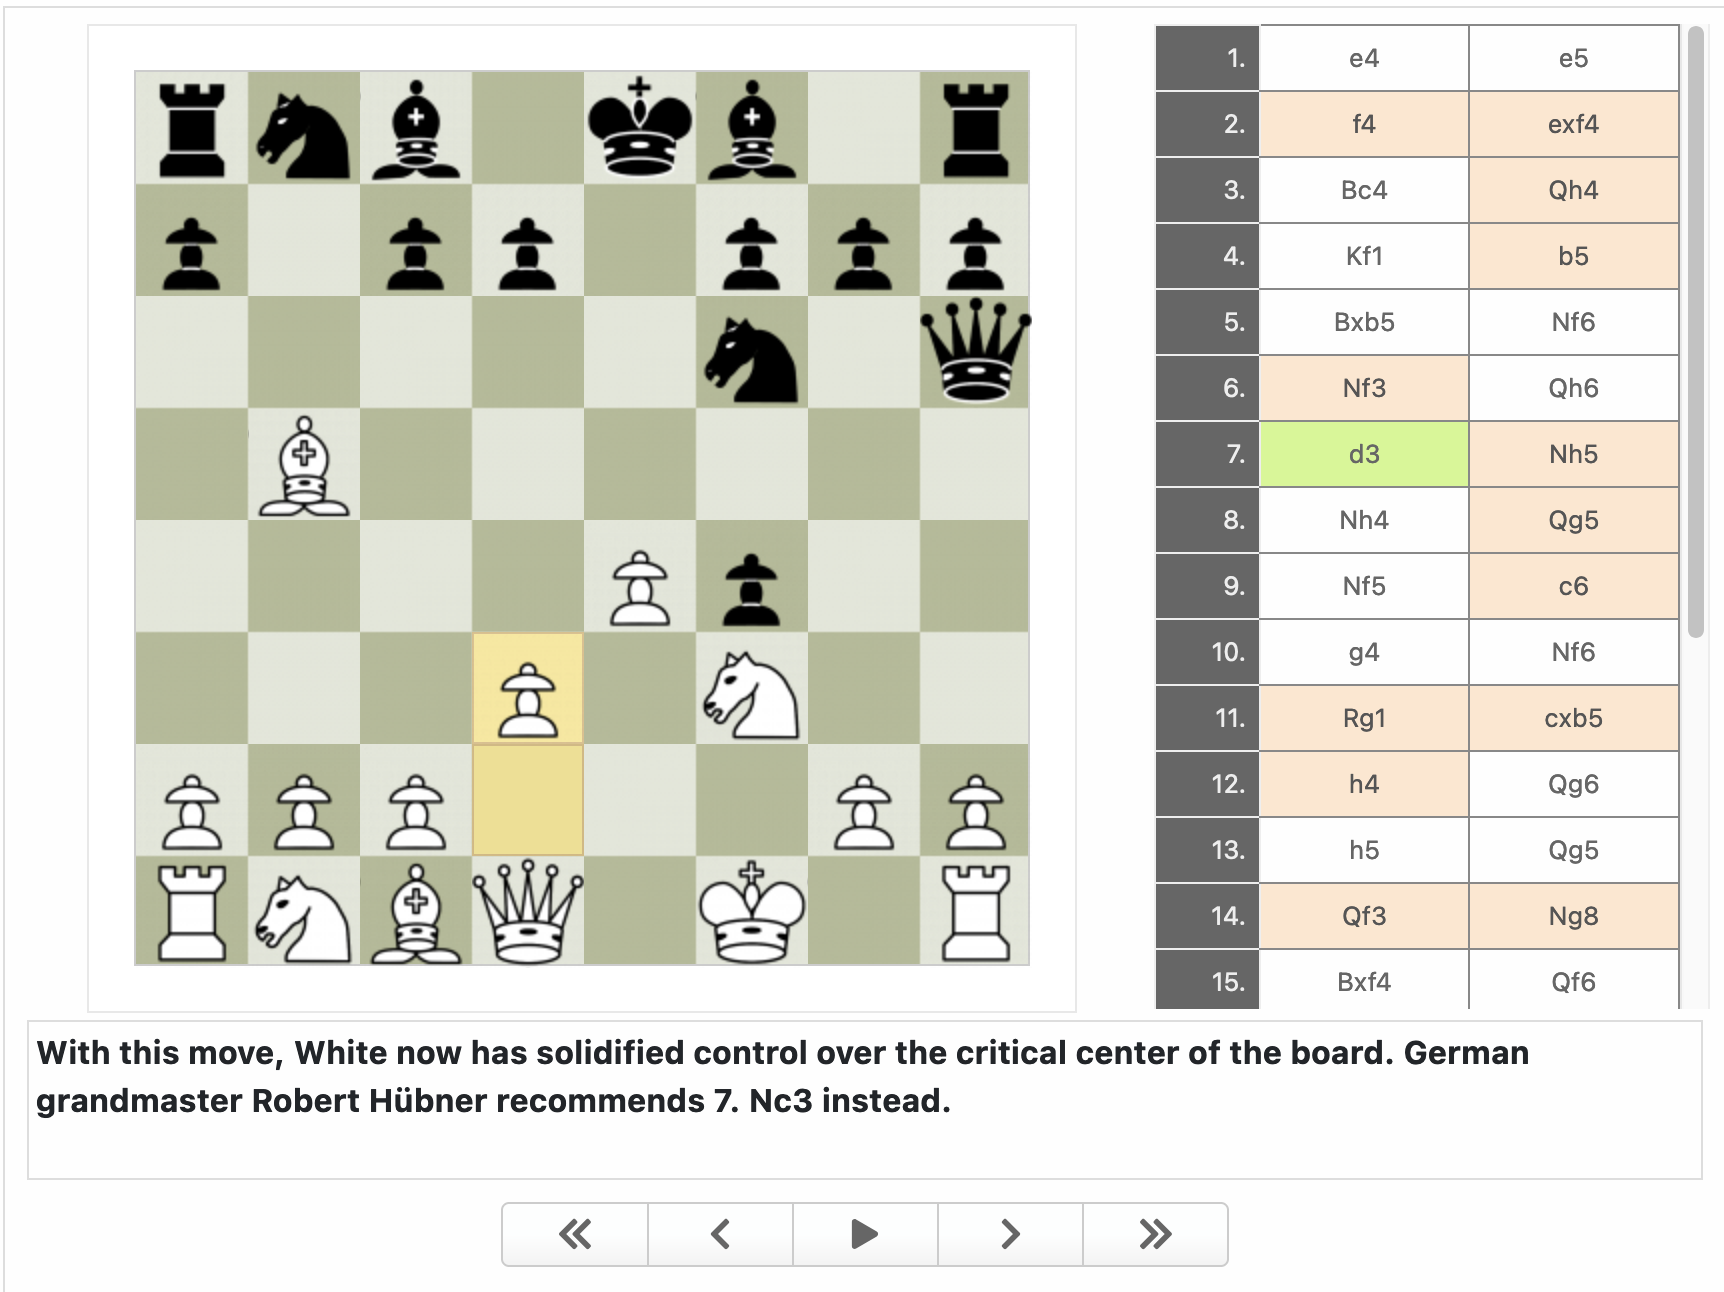 chess-canvas/pgn/chess_openings.csv at master · tomgp/chess-canvas · GitHub